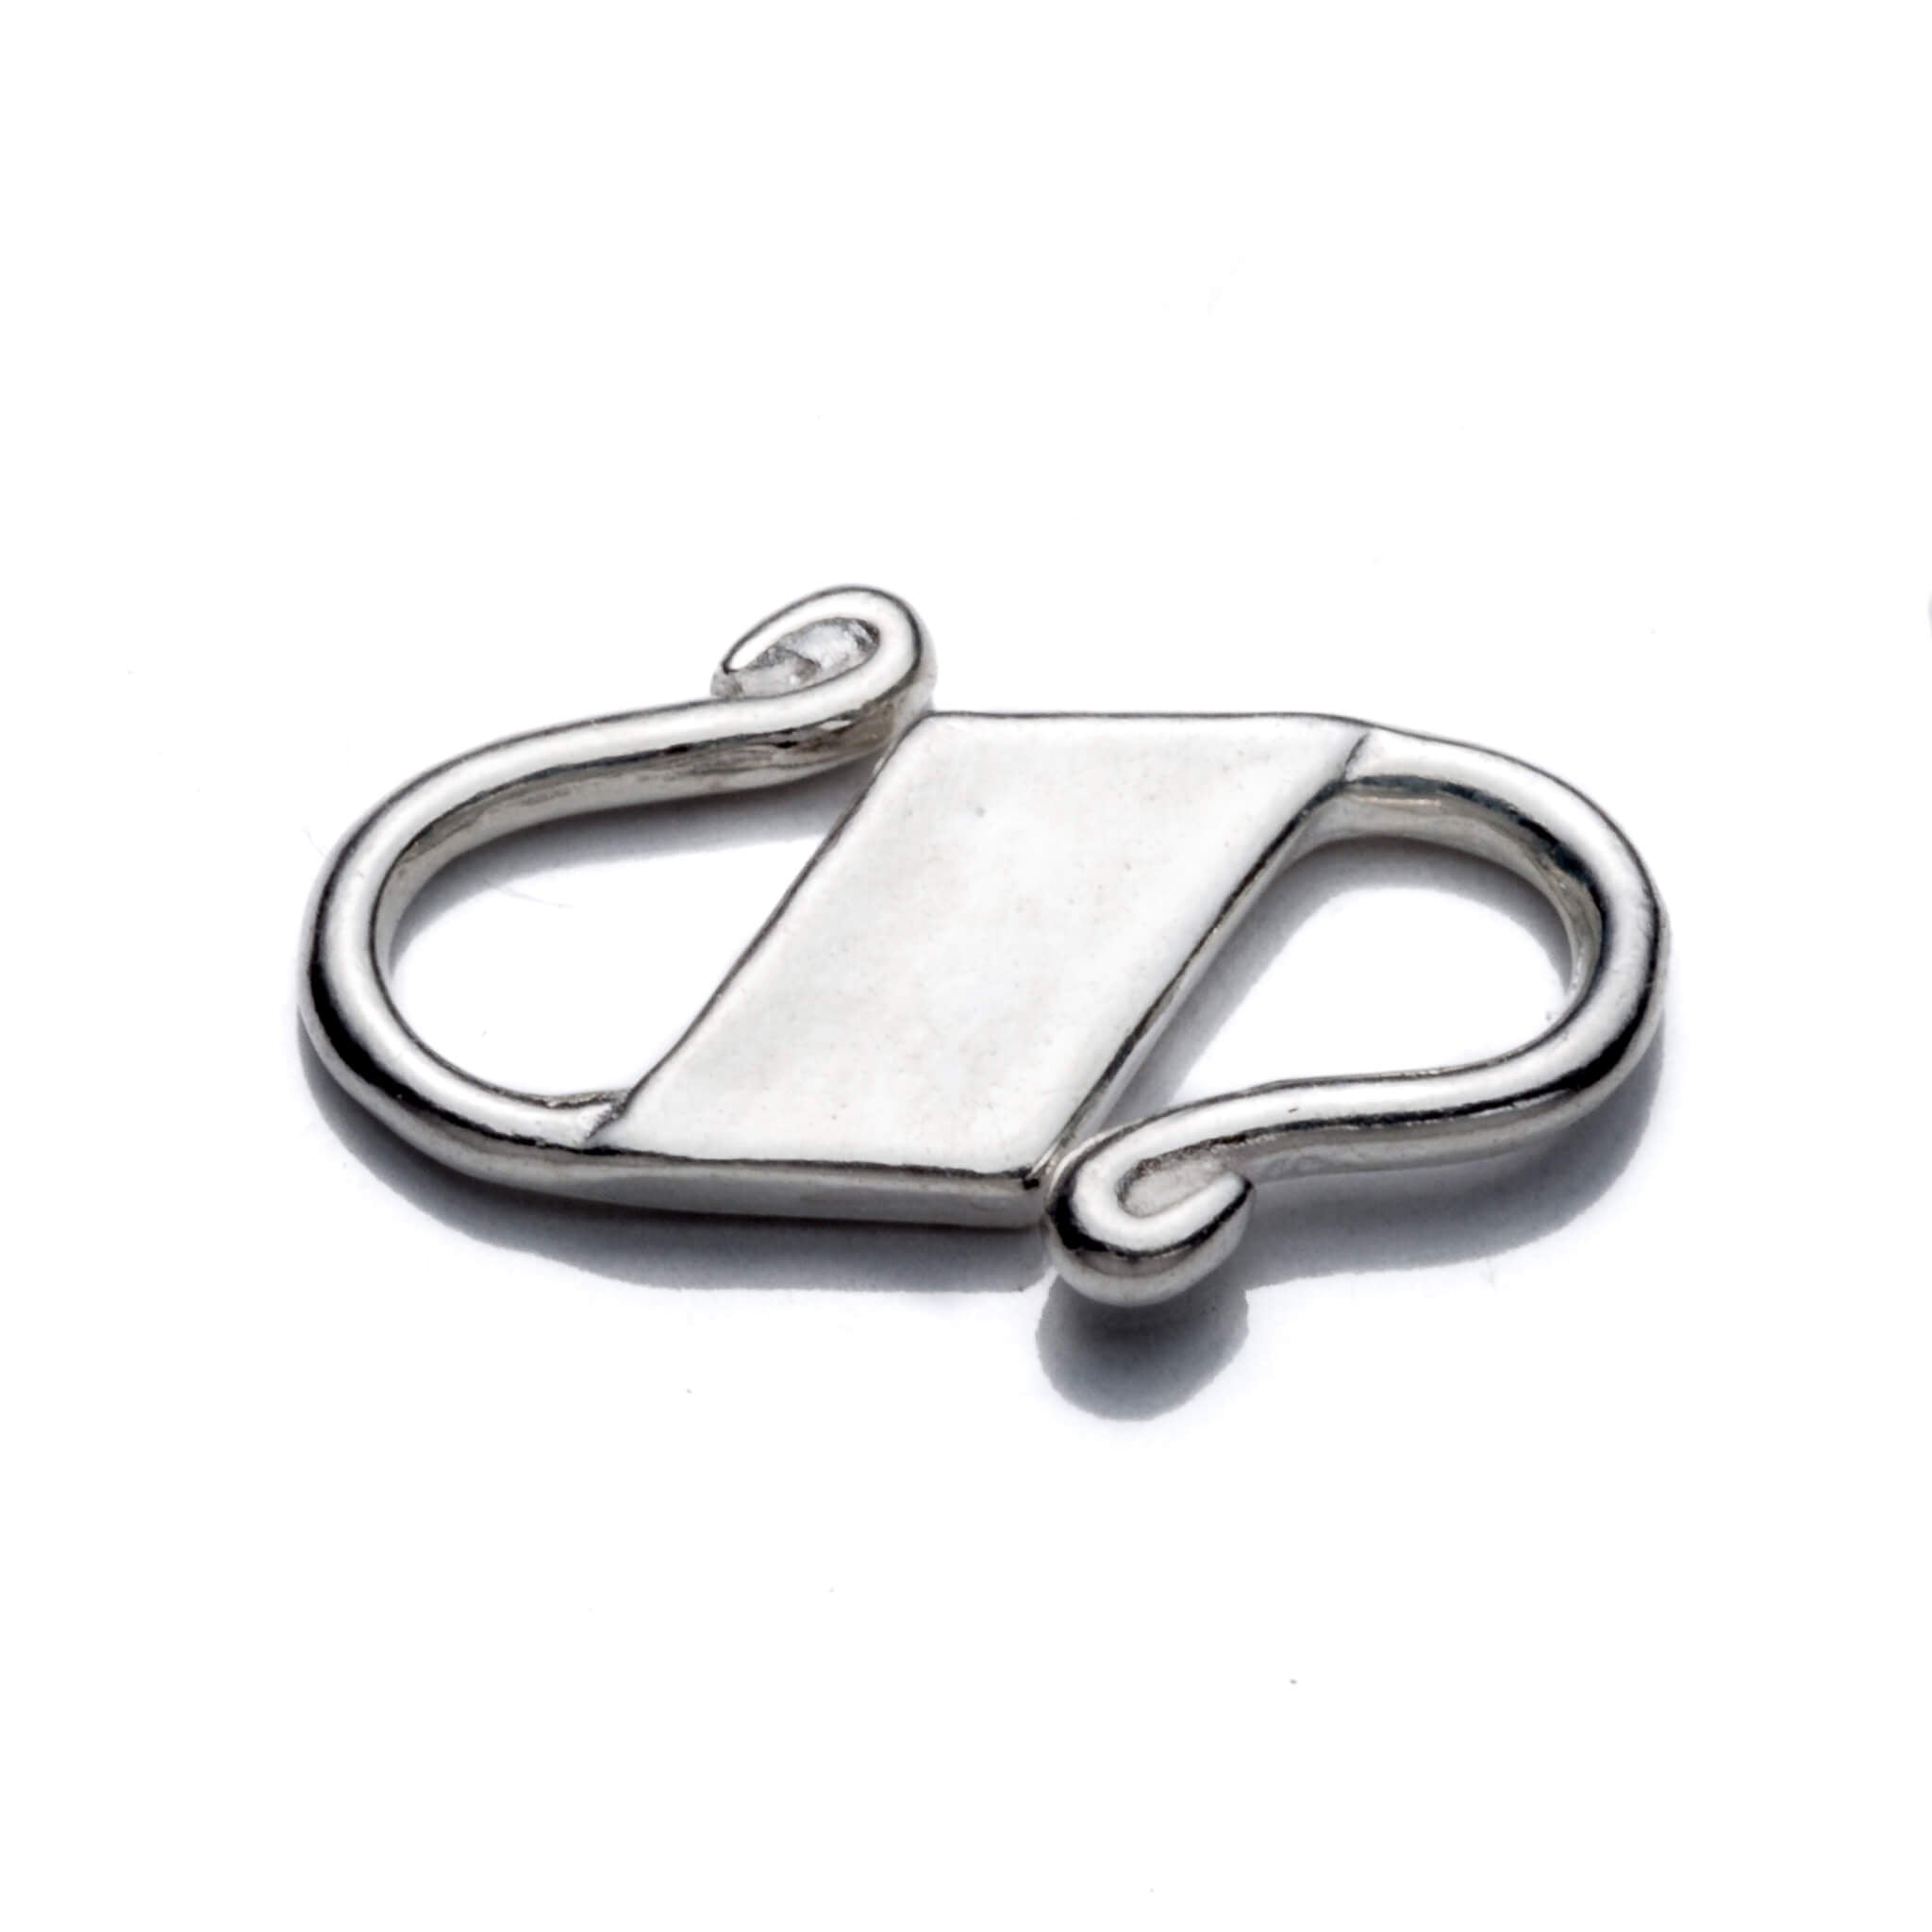 Flat S-Hook Clasp in Sterling Silver 11.2x6.5mm